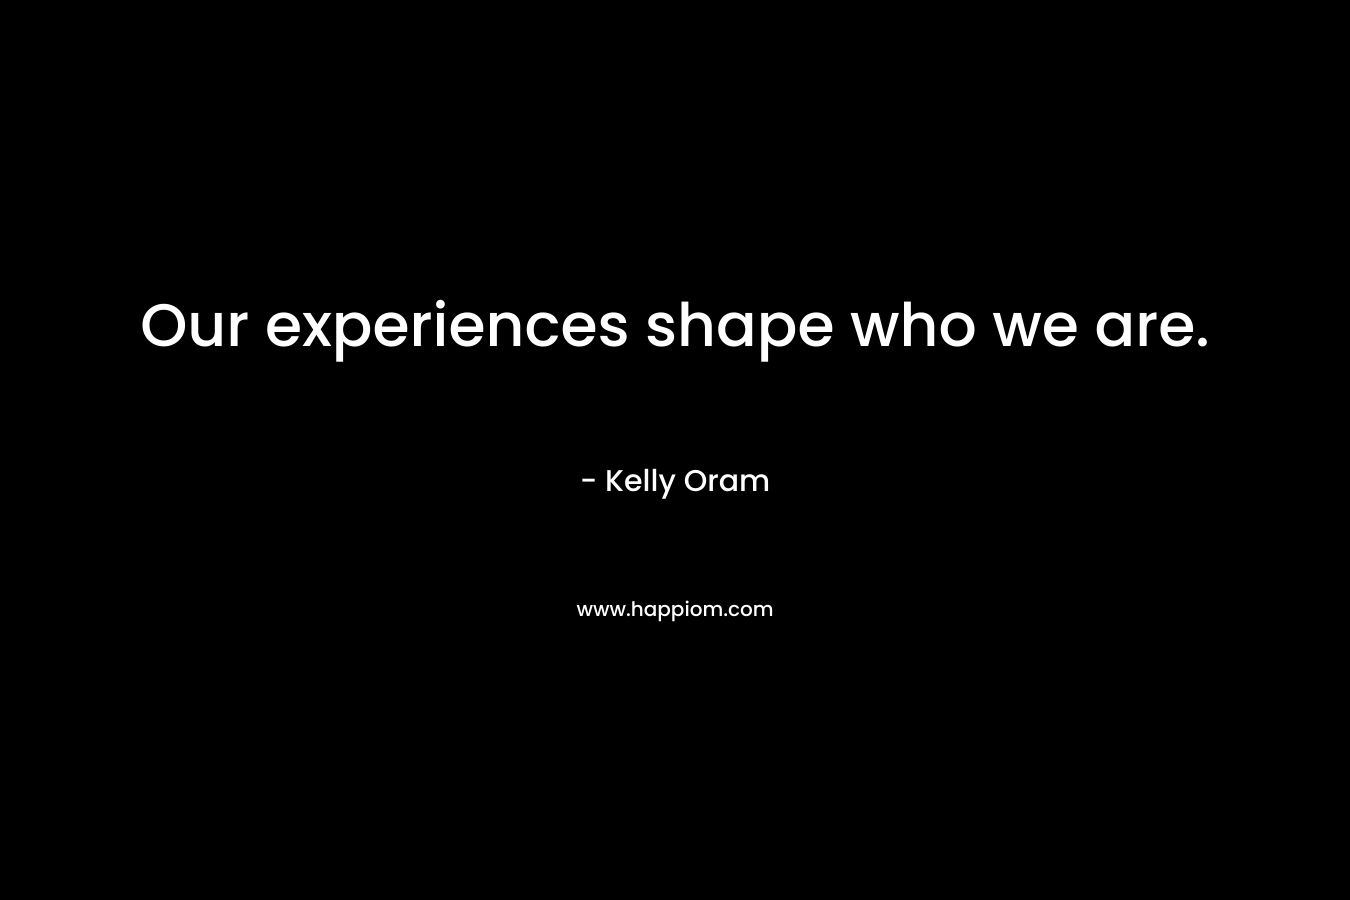 Our experiences shape who we are. – Kelly Oram